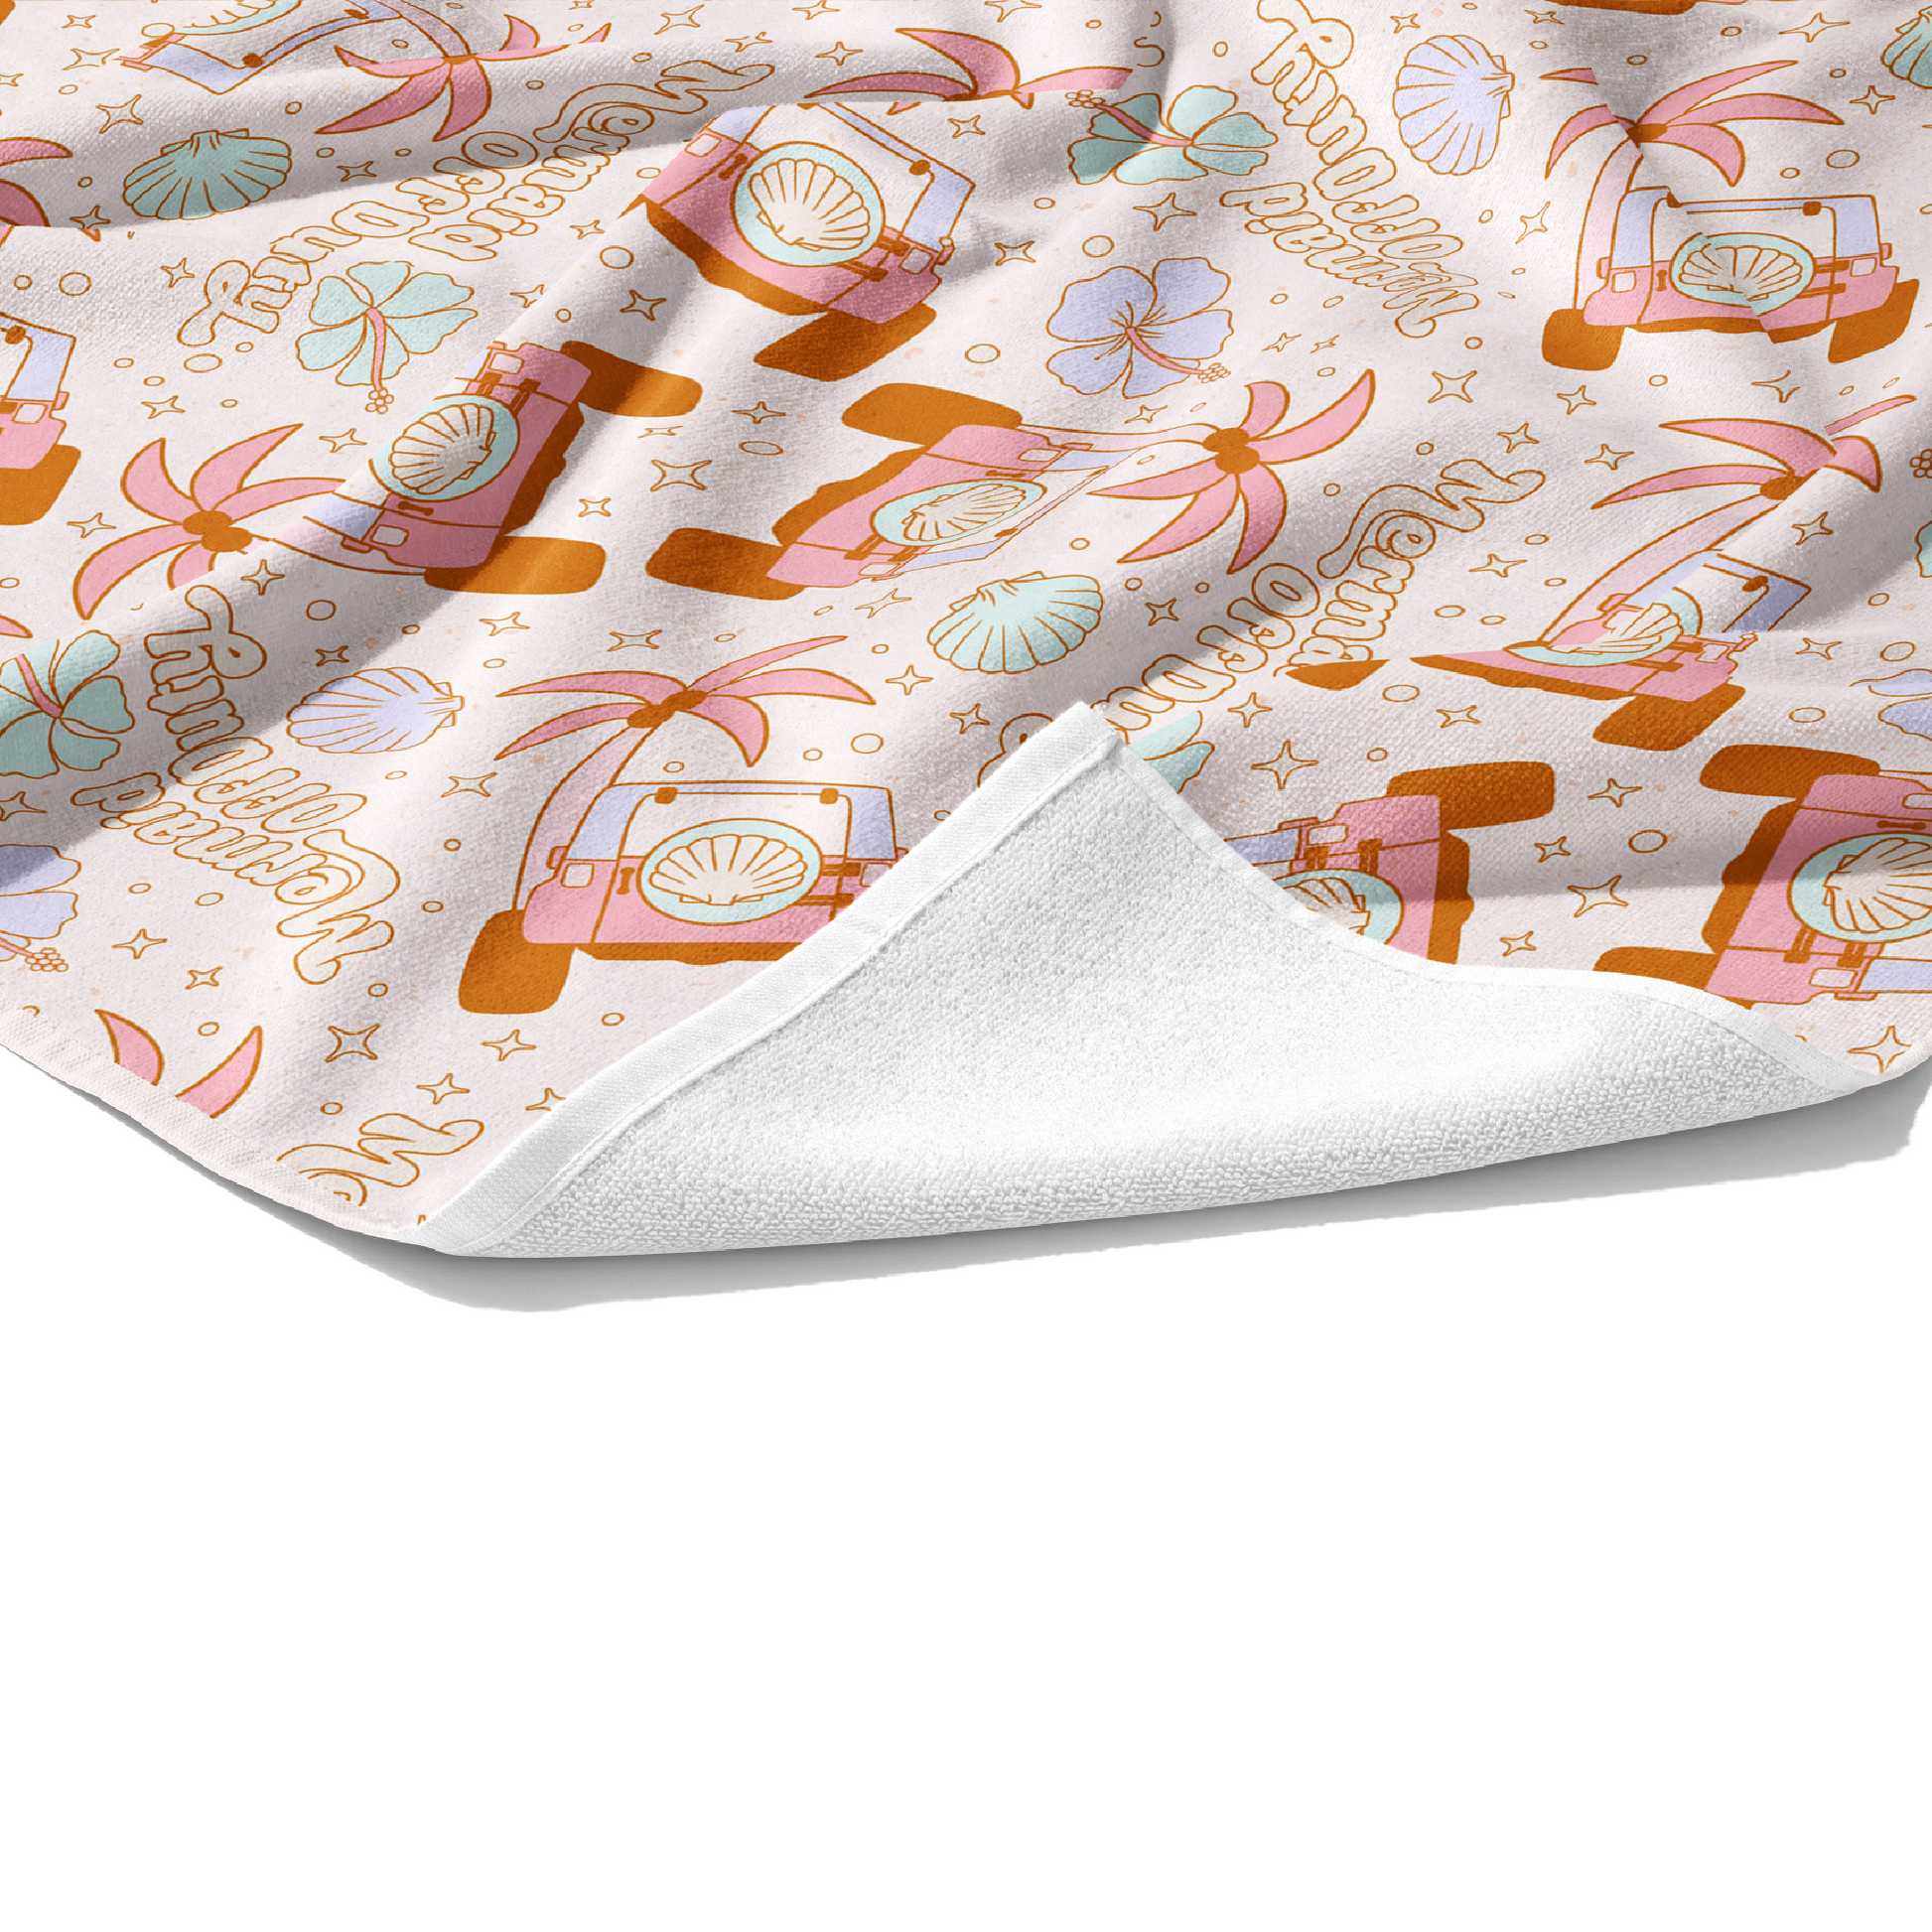 Plush white customizable cotton towel with light pink palm tree and off road vehicle print on the front.